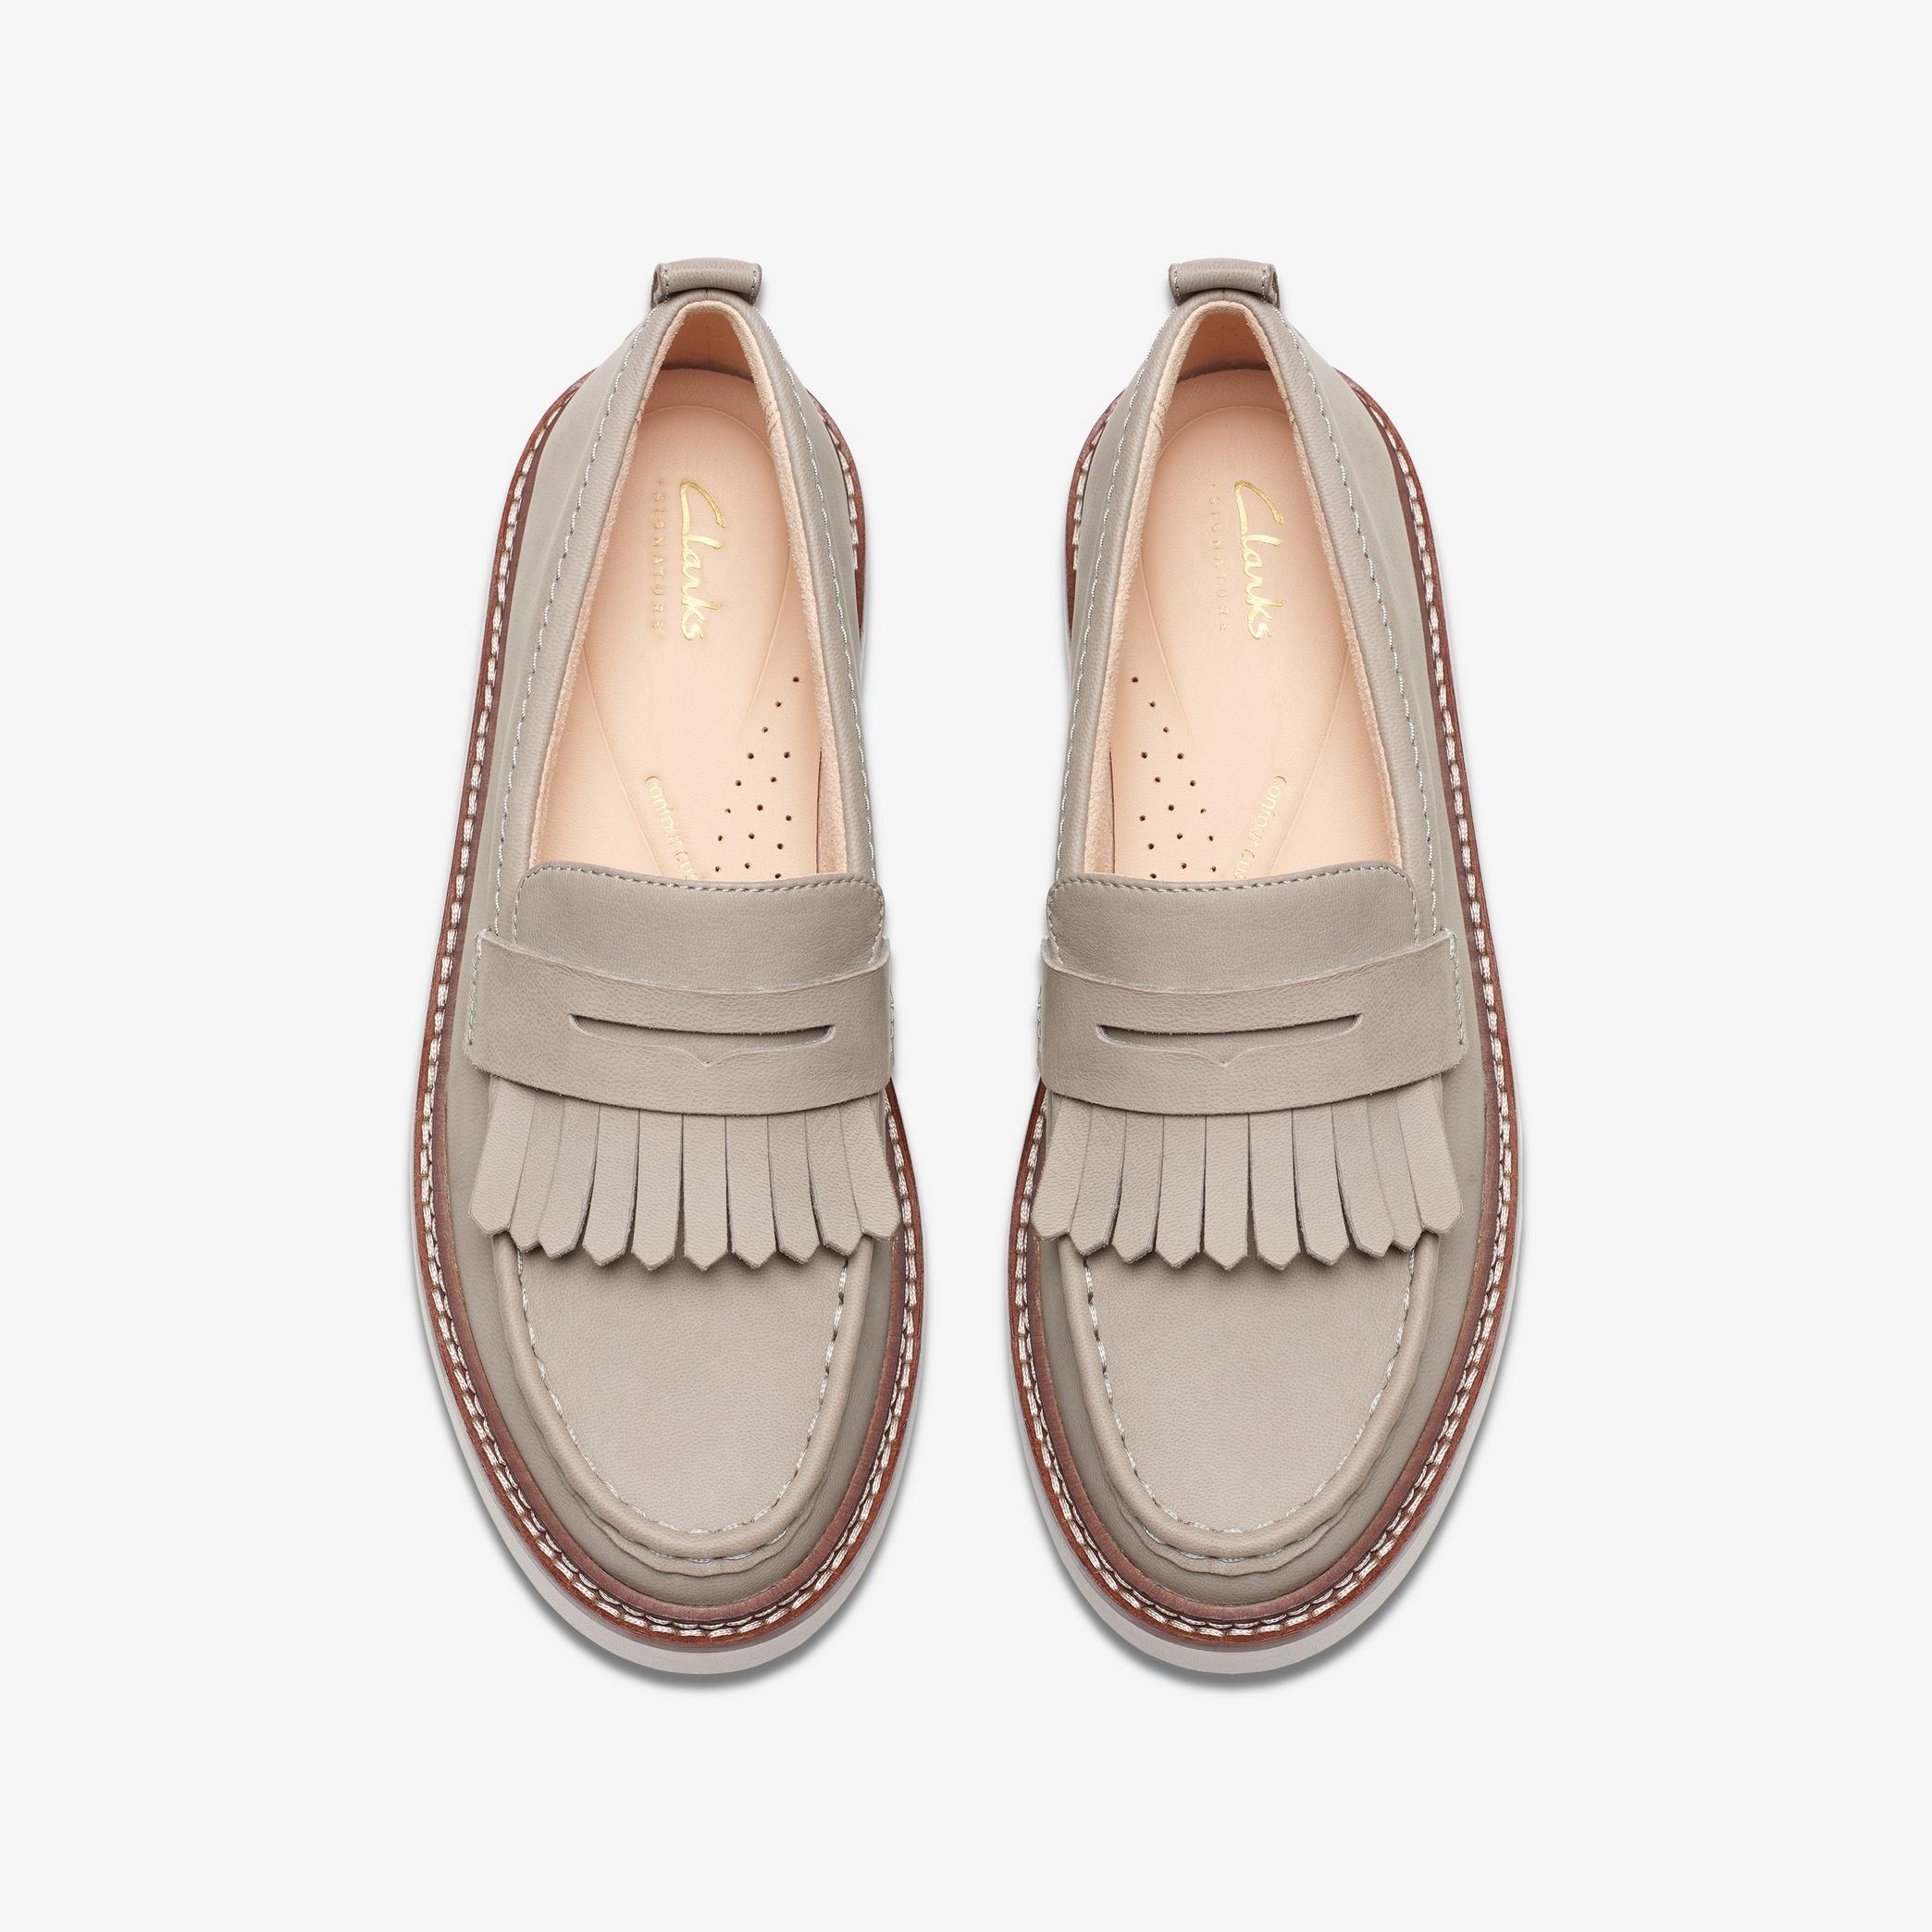 Orianna W Loafer Stone Nubuck Loafers, view 6 of 6